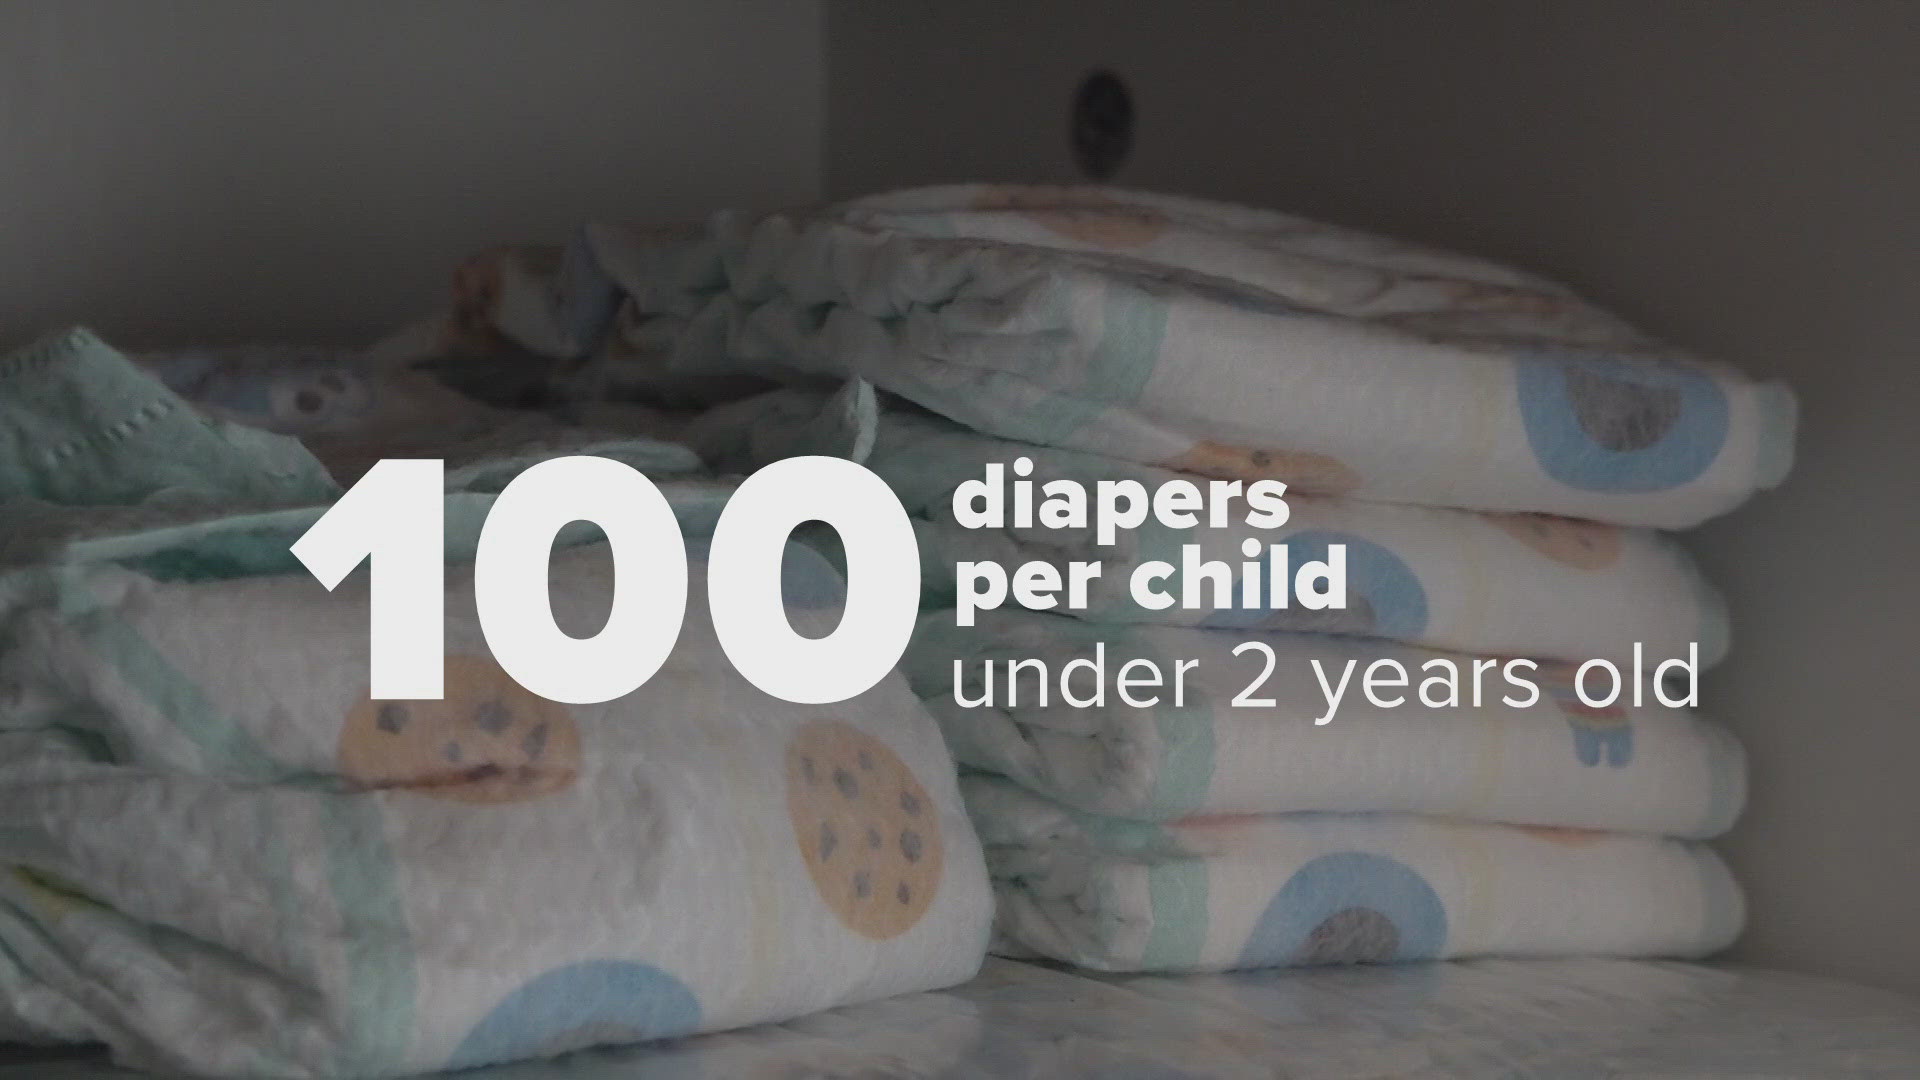 Starting August 1, families will be able to get up to 100 diapers a month for TennCare and CoverKids members under 2 years old.